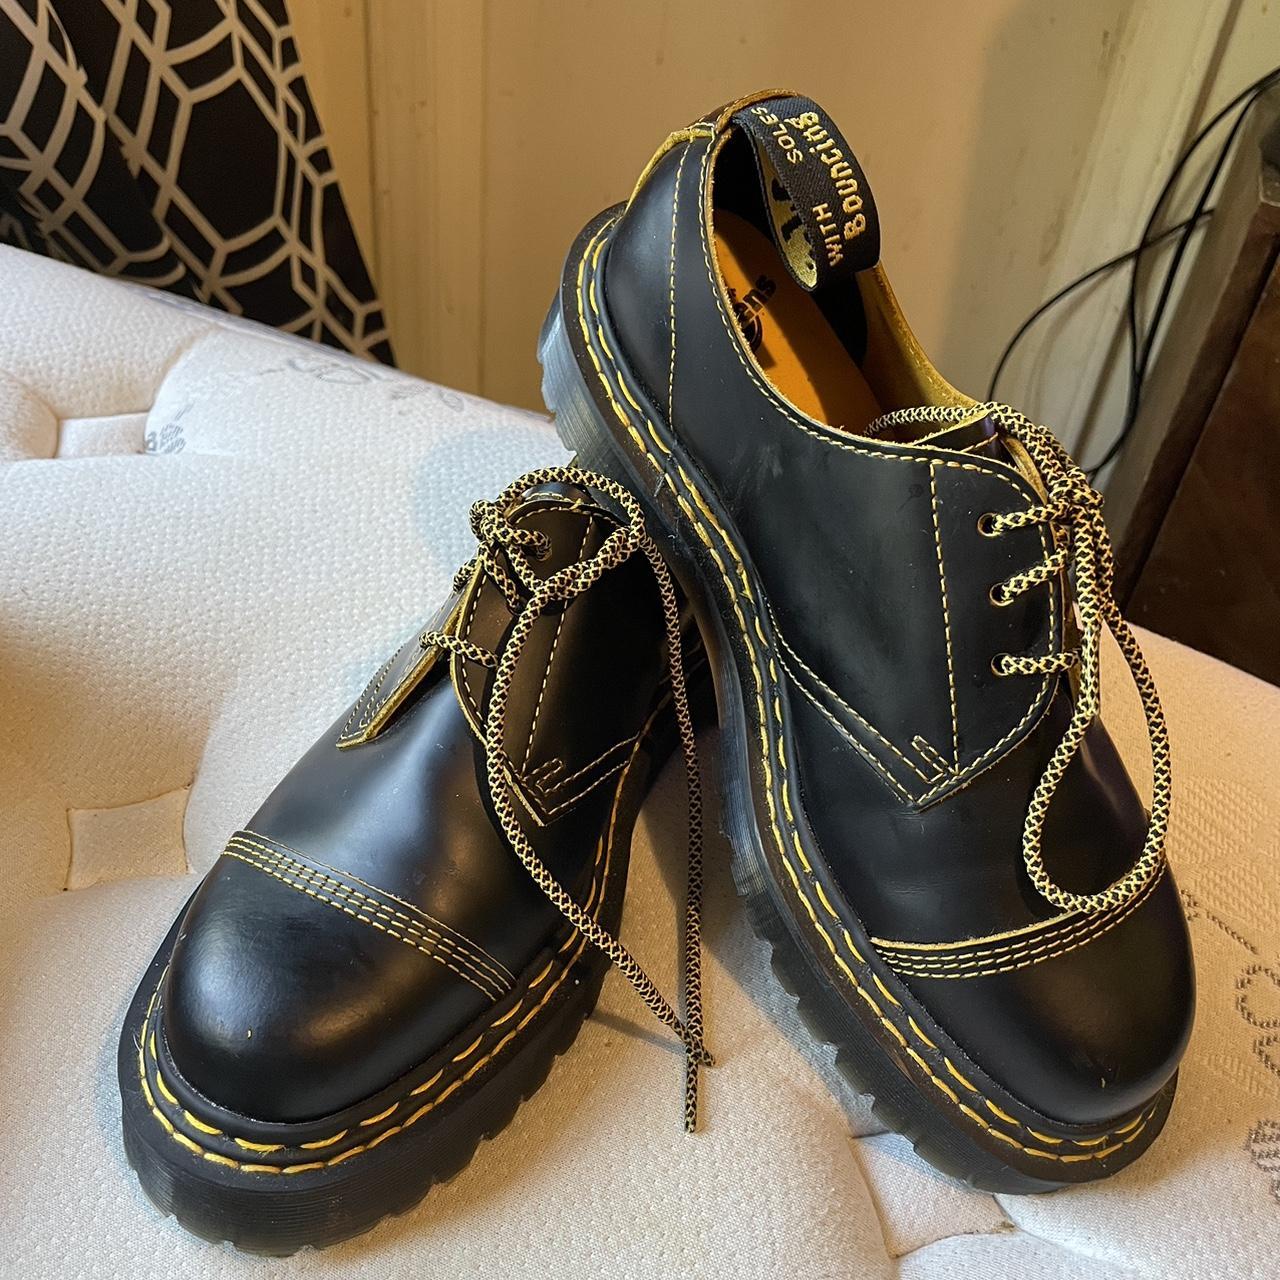 Dr. Martens Men's Black and Yellow Oxfords